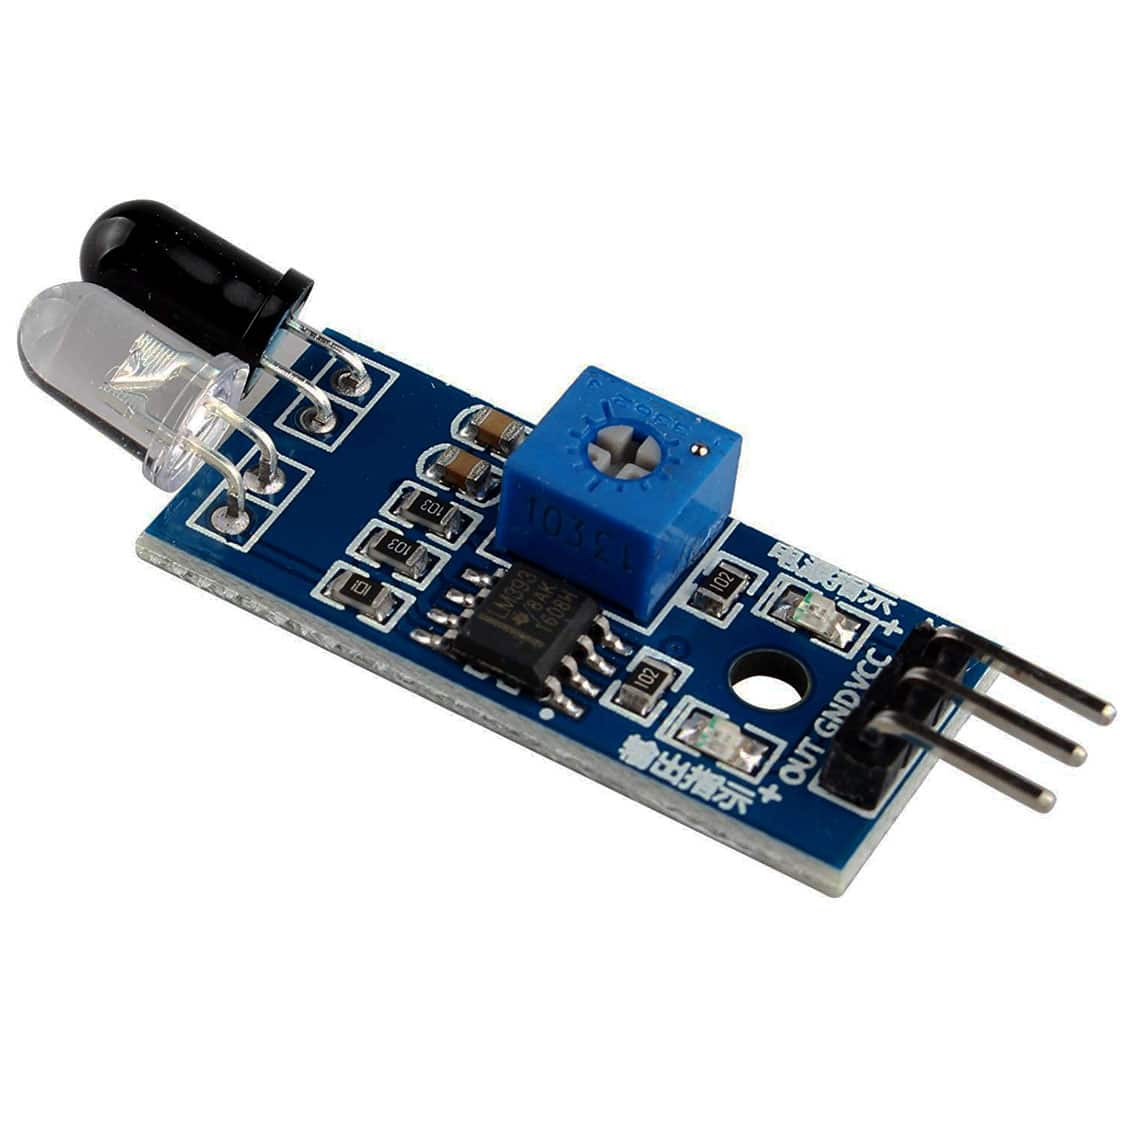 Ir Infrared Distance Obstacle Avoidance Detection Sensor Module Ky 032 Phipps Electronics 